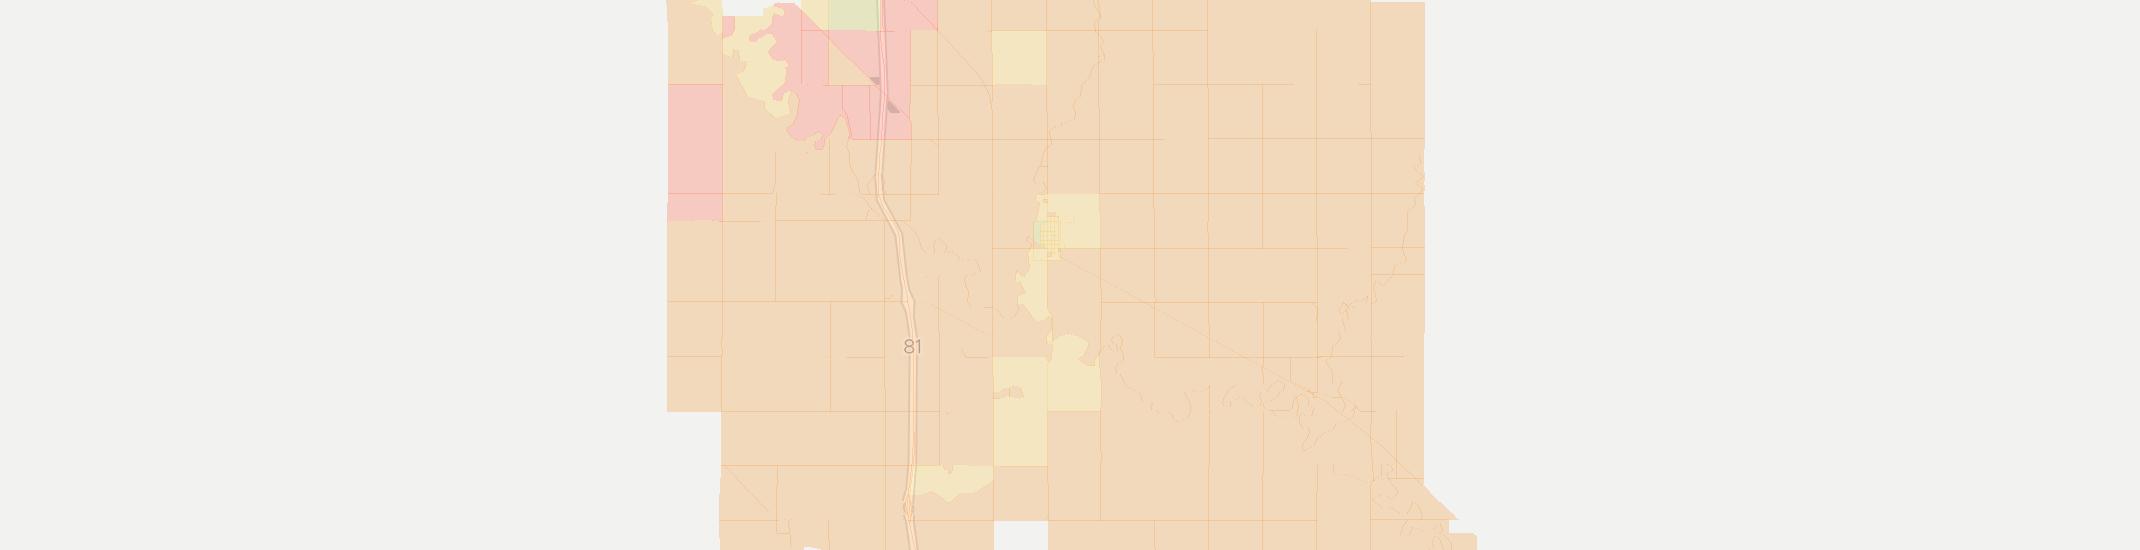 Bennington Internet Competition Map. Click for interactive map.